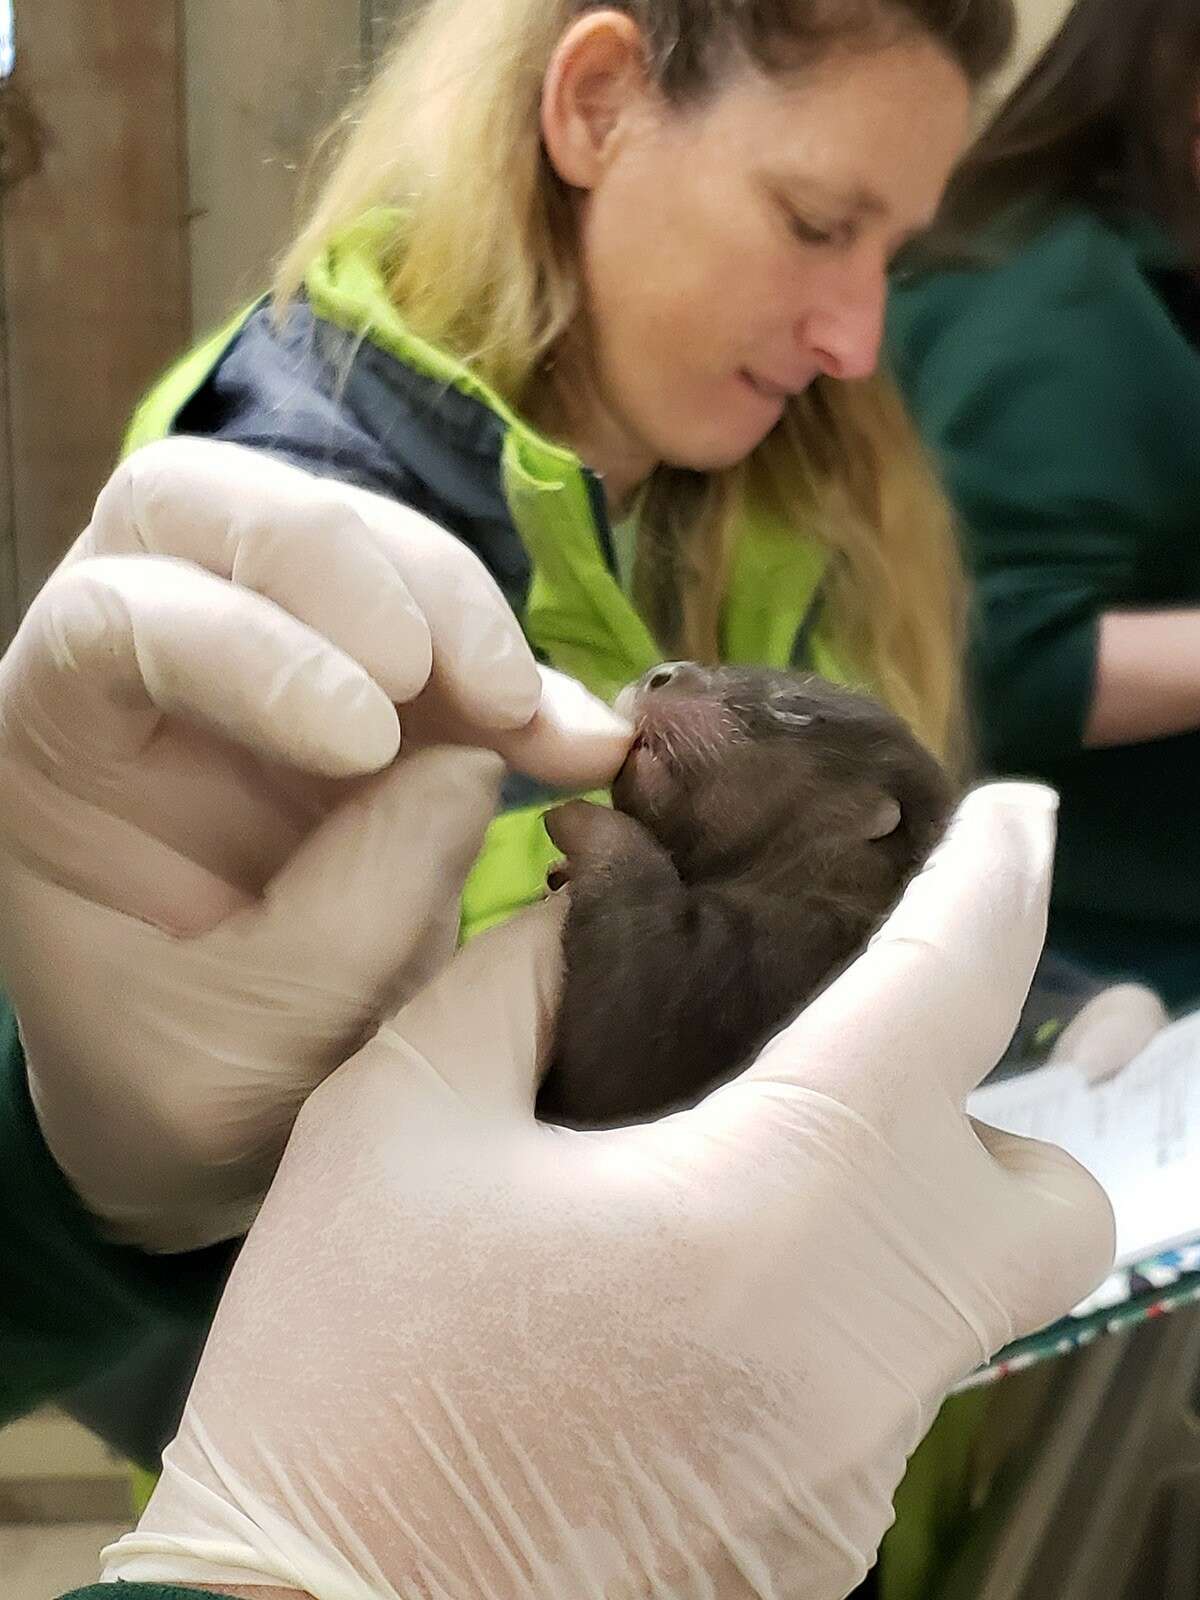 Woodland Park Zoo shares a first look at the otter pups born in March 2019. The pups are the first documented river otter birth in Woodland Park's 119-year history.